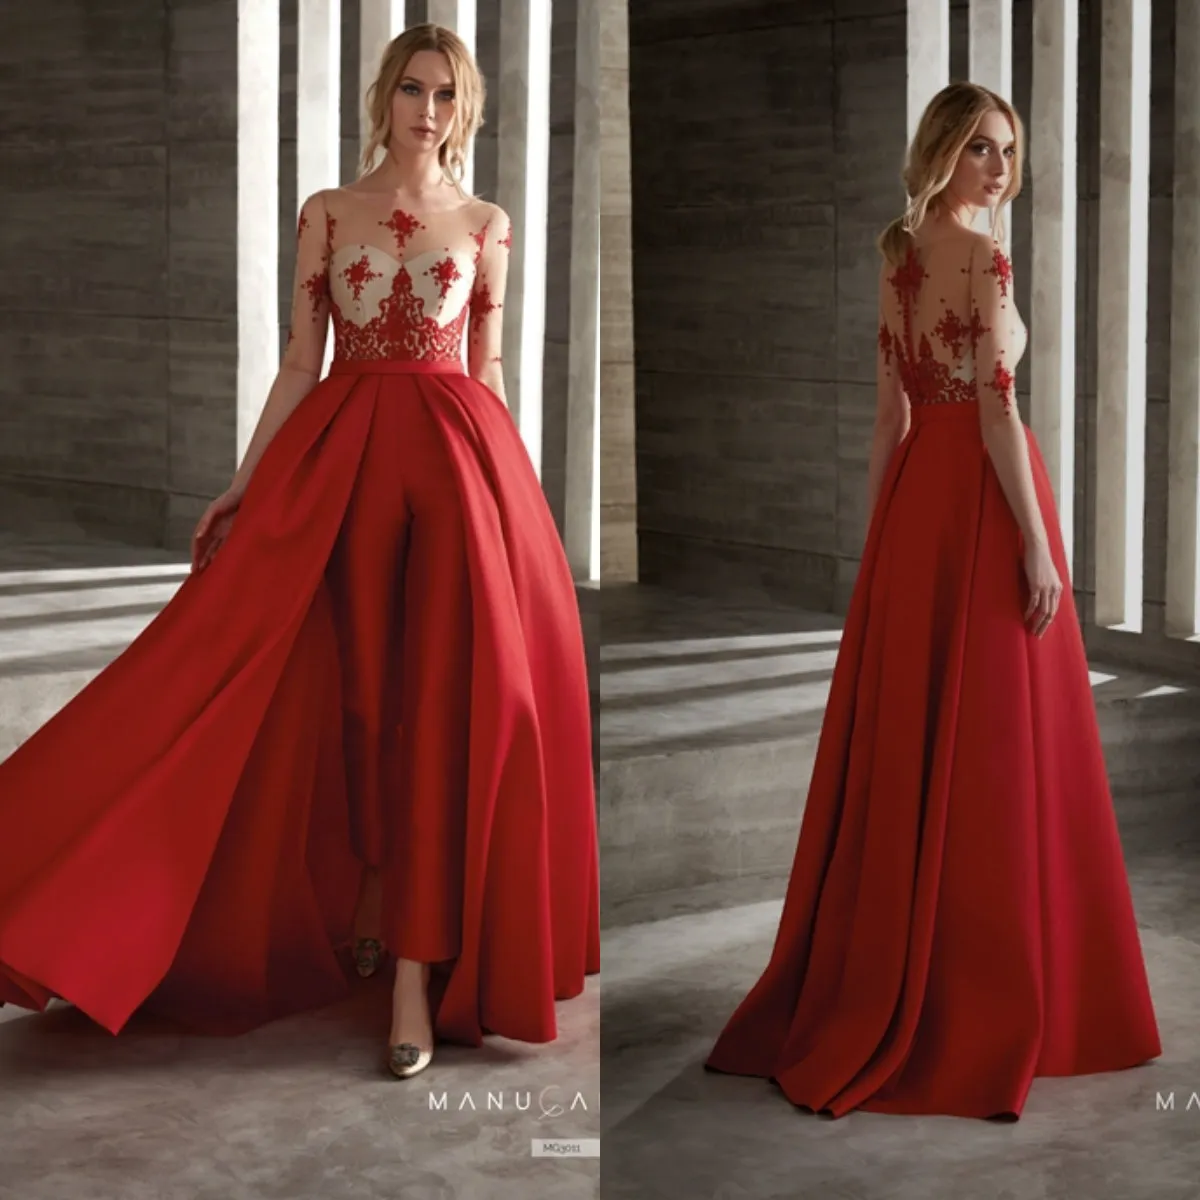 Red Prom Dresses With Detachable Skirt Satin Fashion Women Jumpsuit Half Long Sleeve Cocktail Dress Party Wear Custom Made evening Gowns